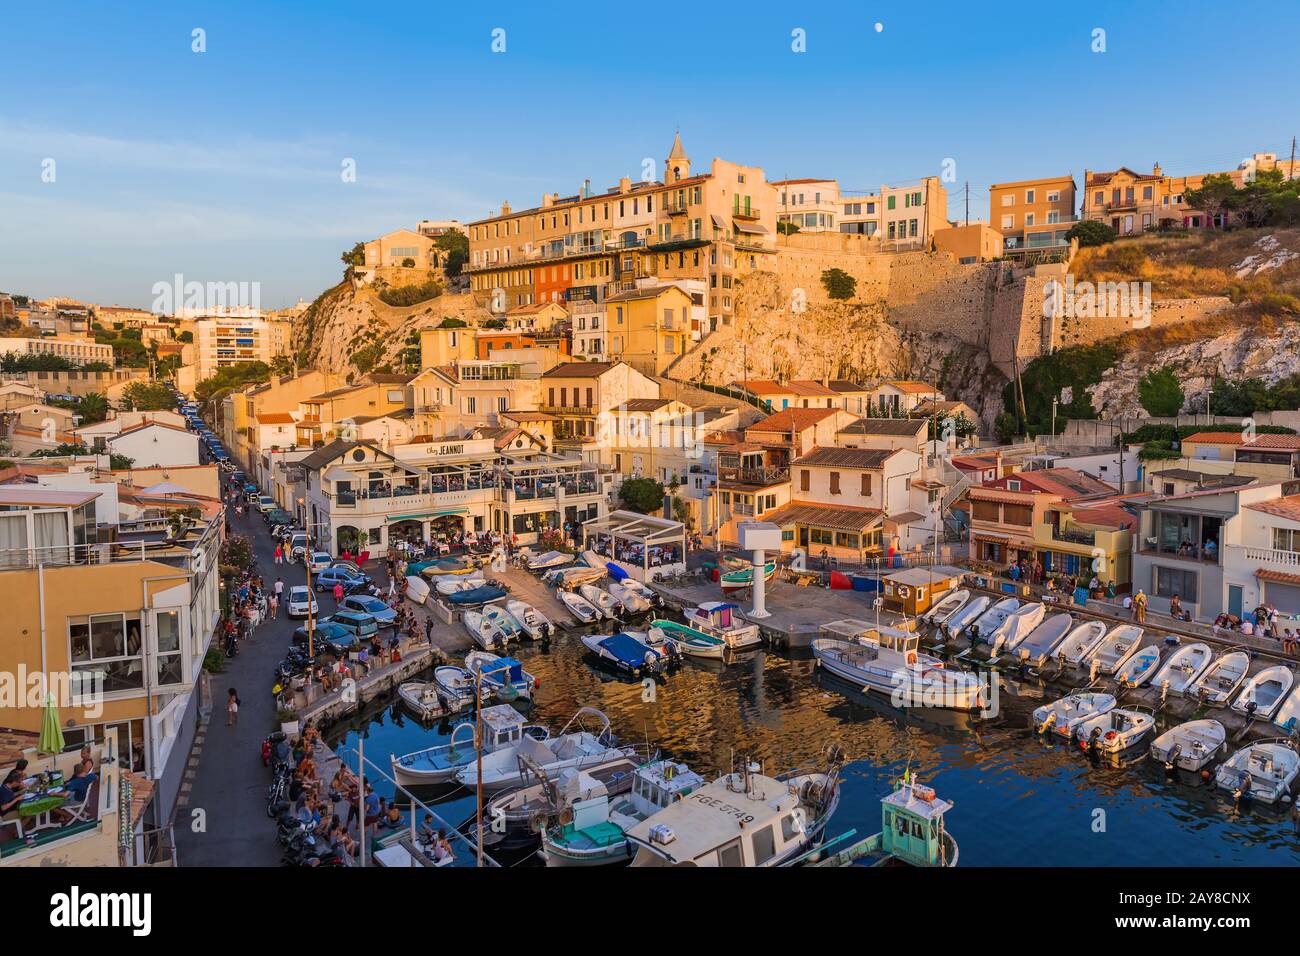 Marseille, France - August 03, 2017: Fishing boats in harbor Vallon des Auffes Stock Photo